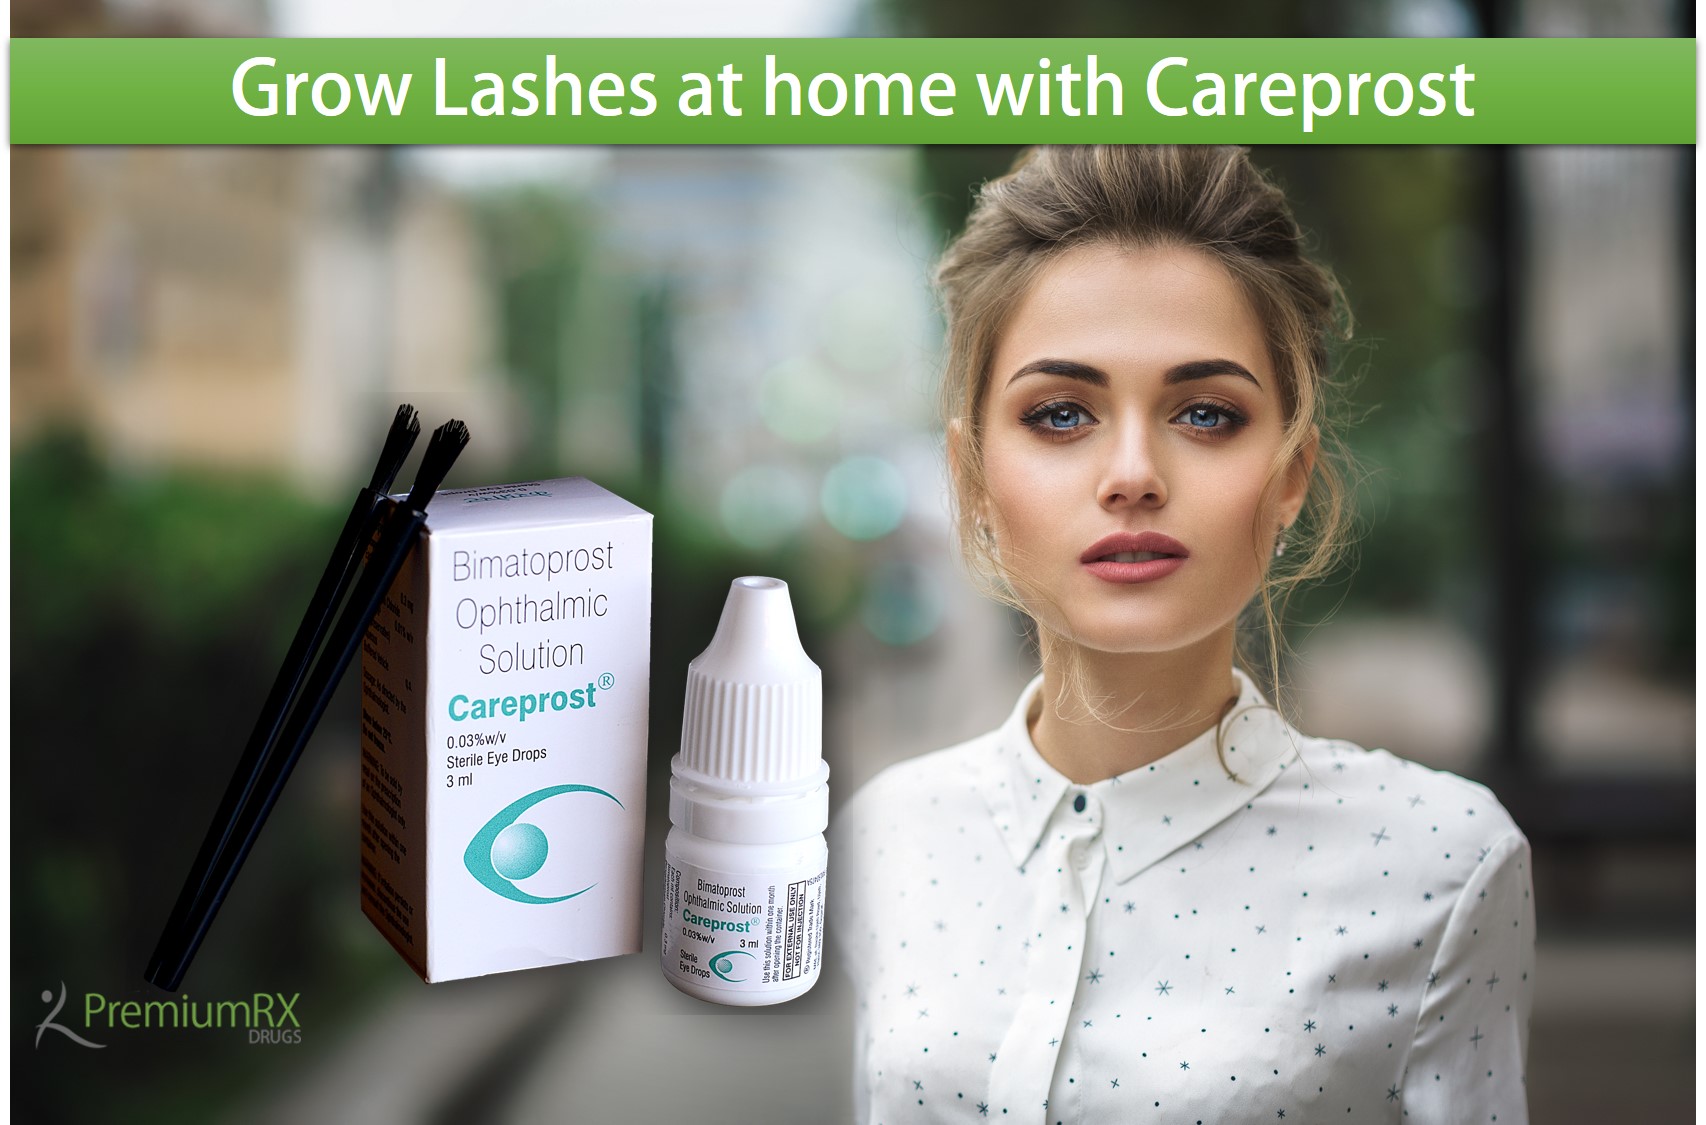 How Long Does It Take For Careprost To Work On Eyelash Growth